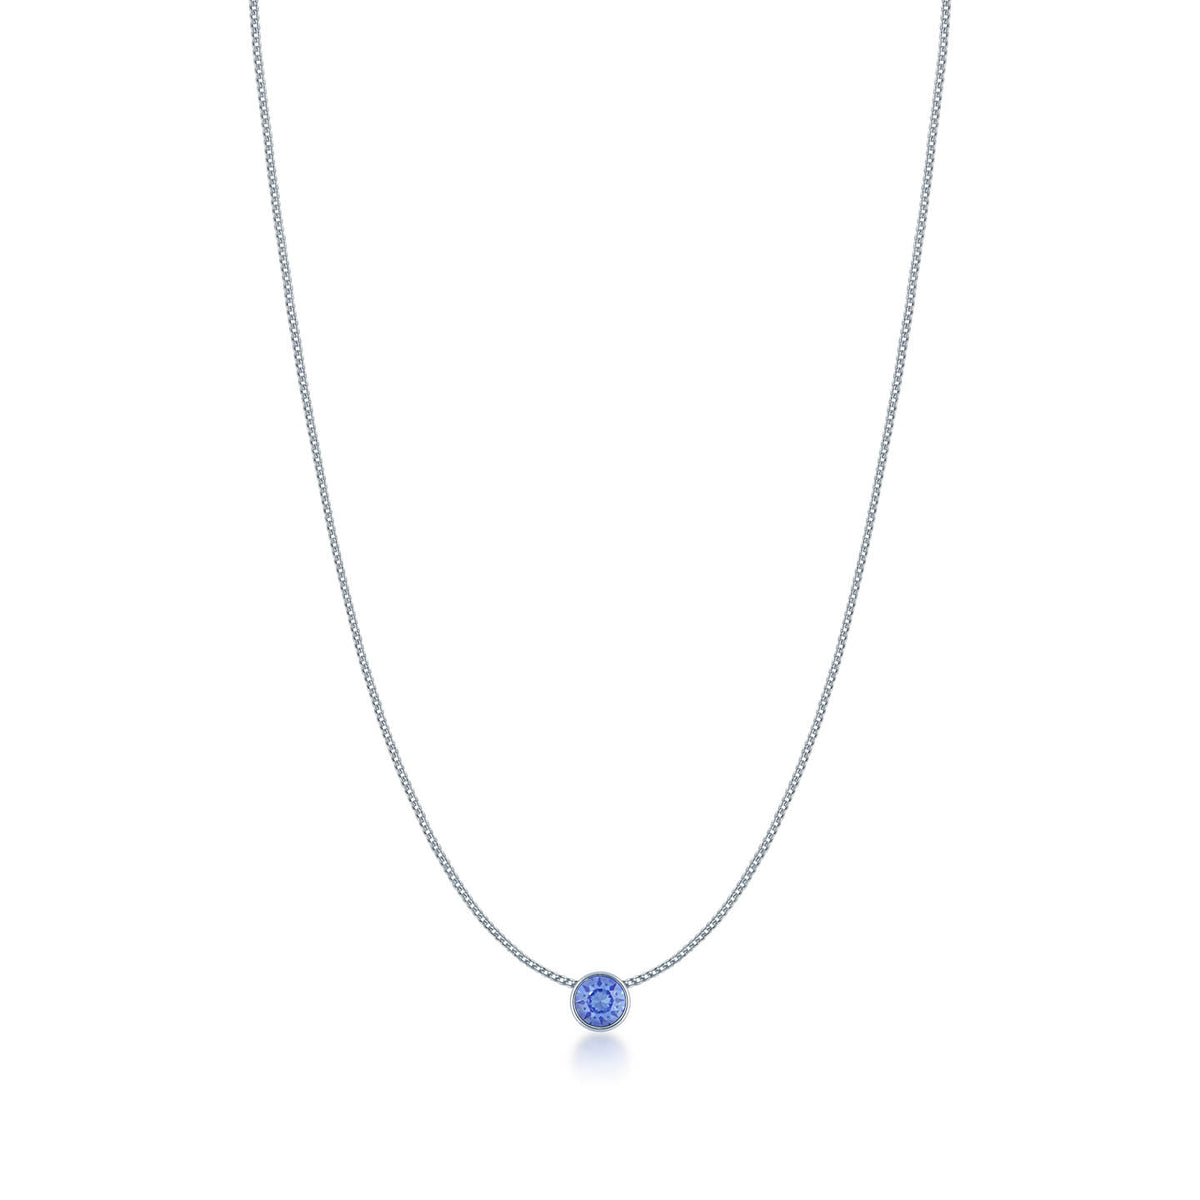 Harley Small Pendant Necklace with Blue Light Sapphire Round Crystals from Swarovski Silver Toned Rhodium Plated - Ed Heart